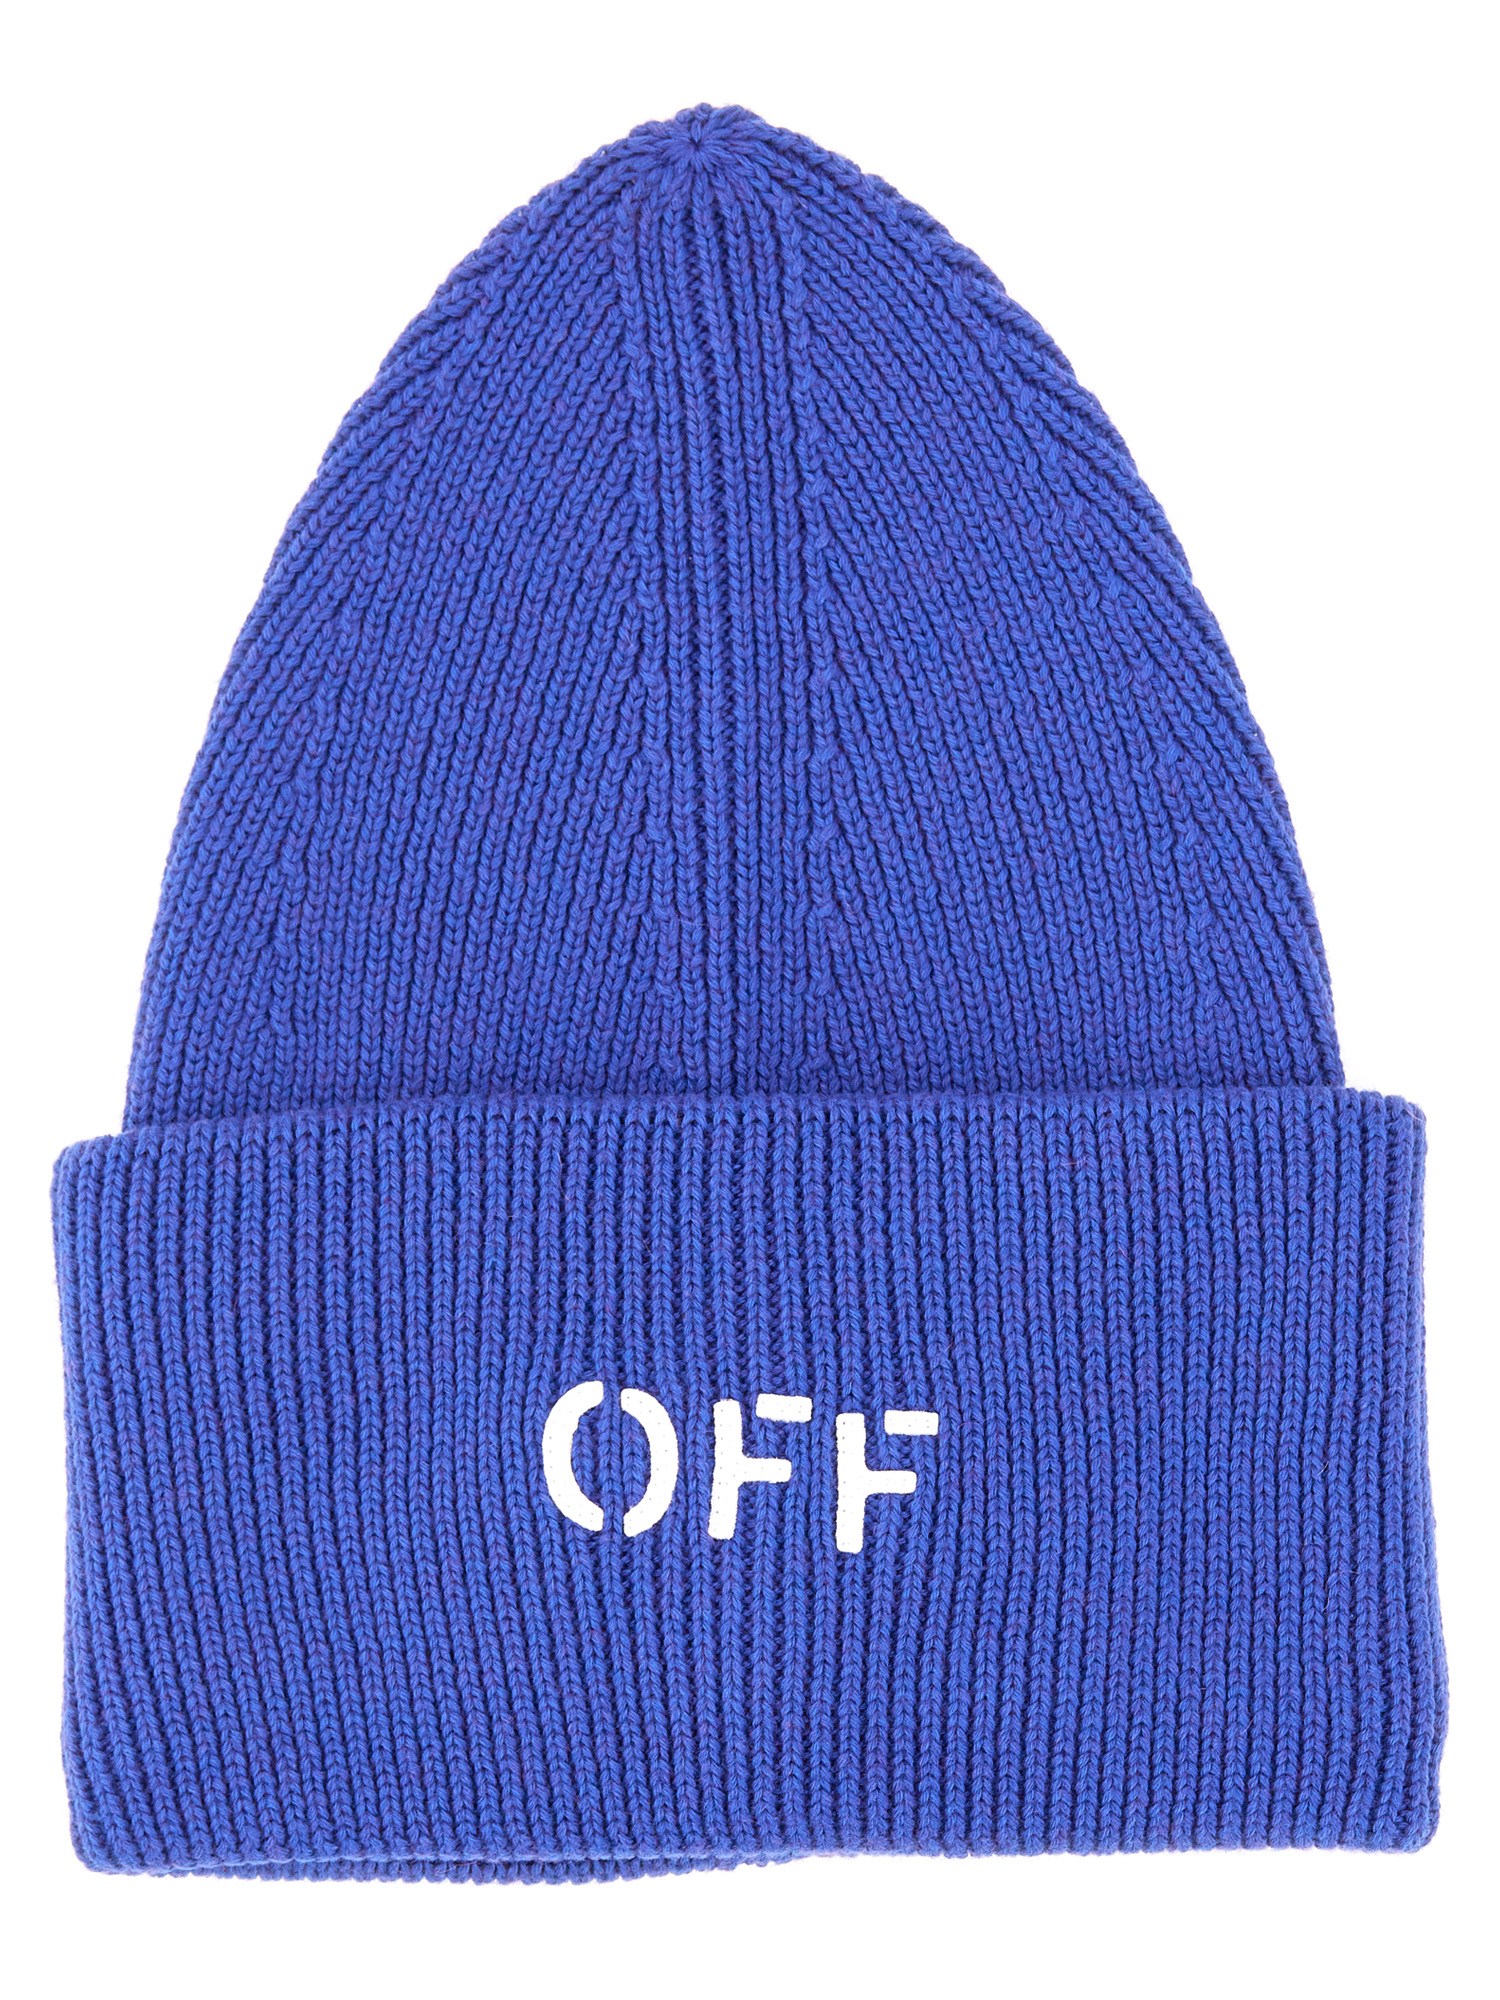 off-white loose fit knit hat